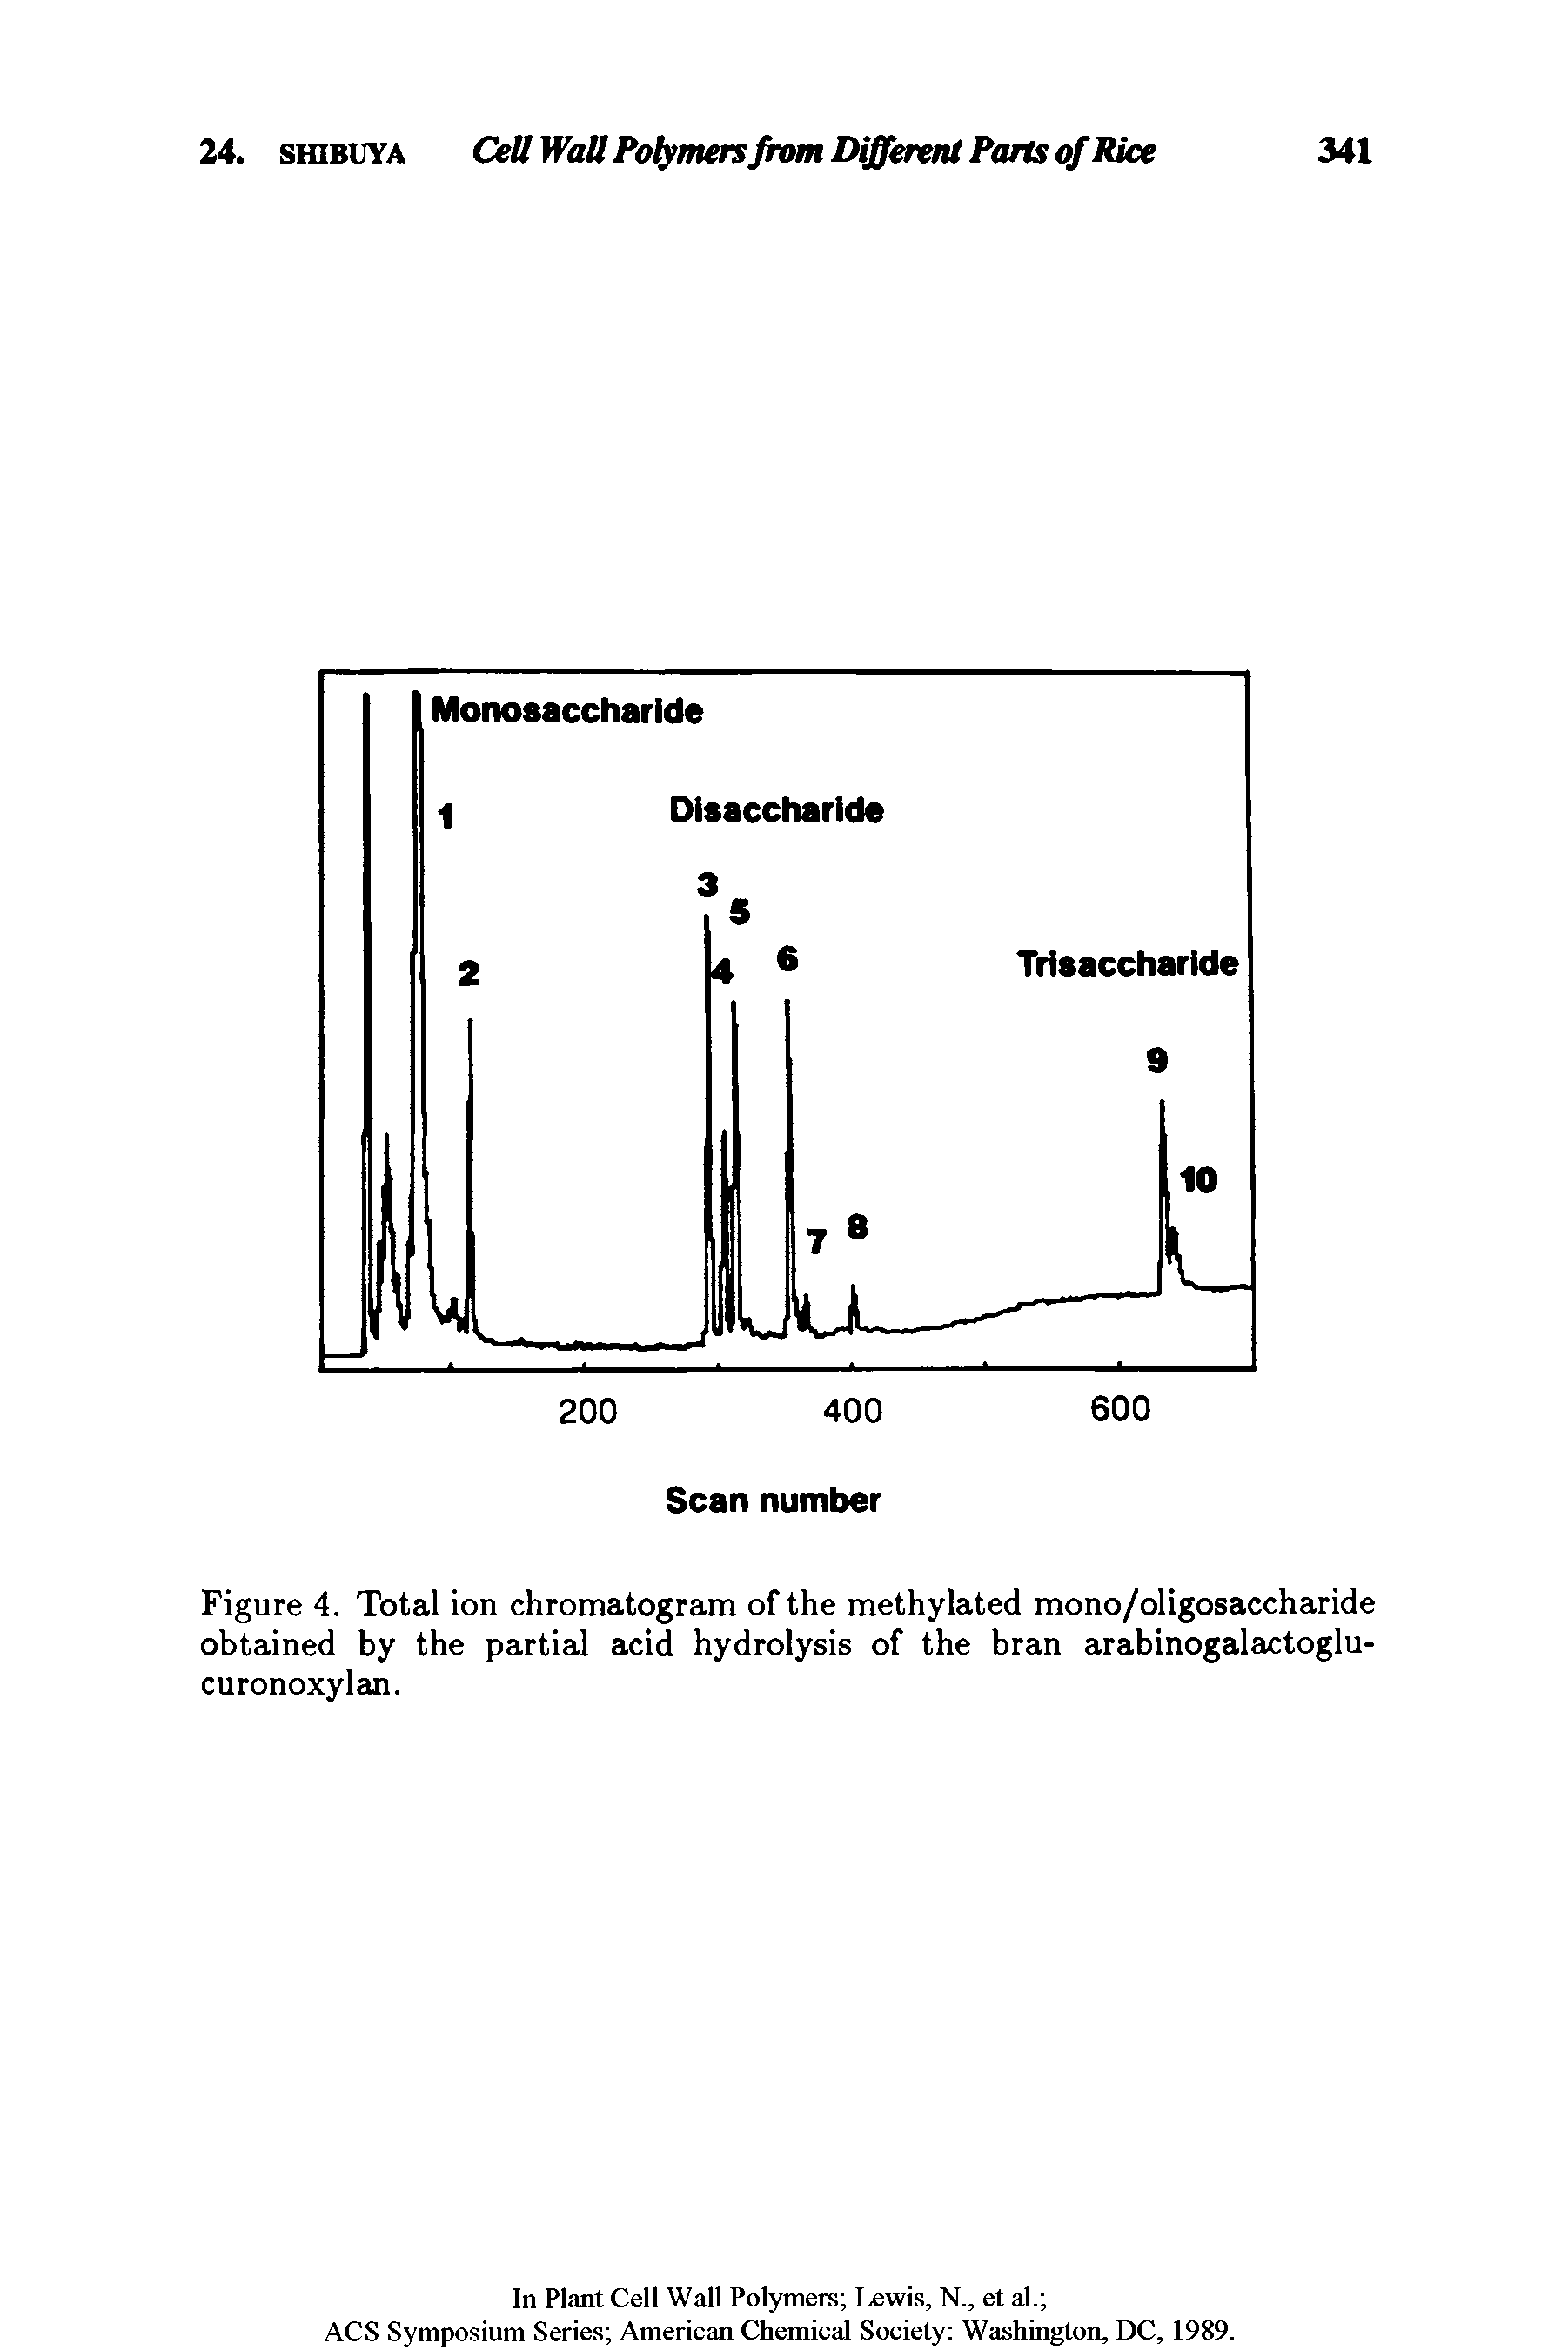 Figure 4. Total ion chromatogram of the methylated mono/oligosaccharide obtained by the partial acid hydrolysis of the bran arabinogalactoglu-curonoxylan.